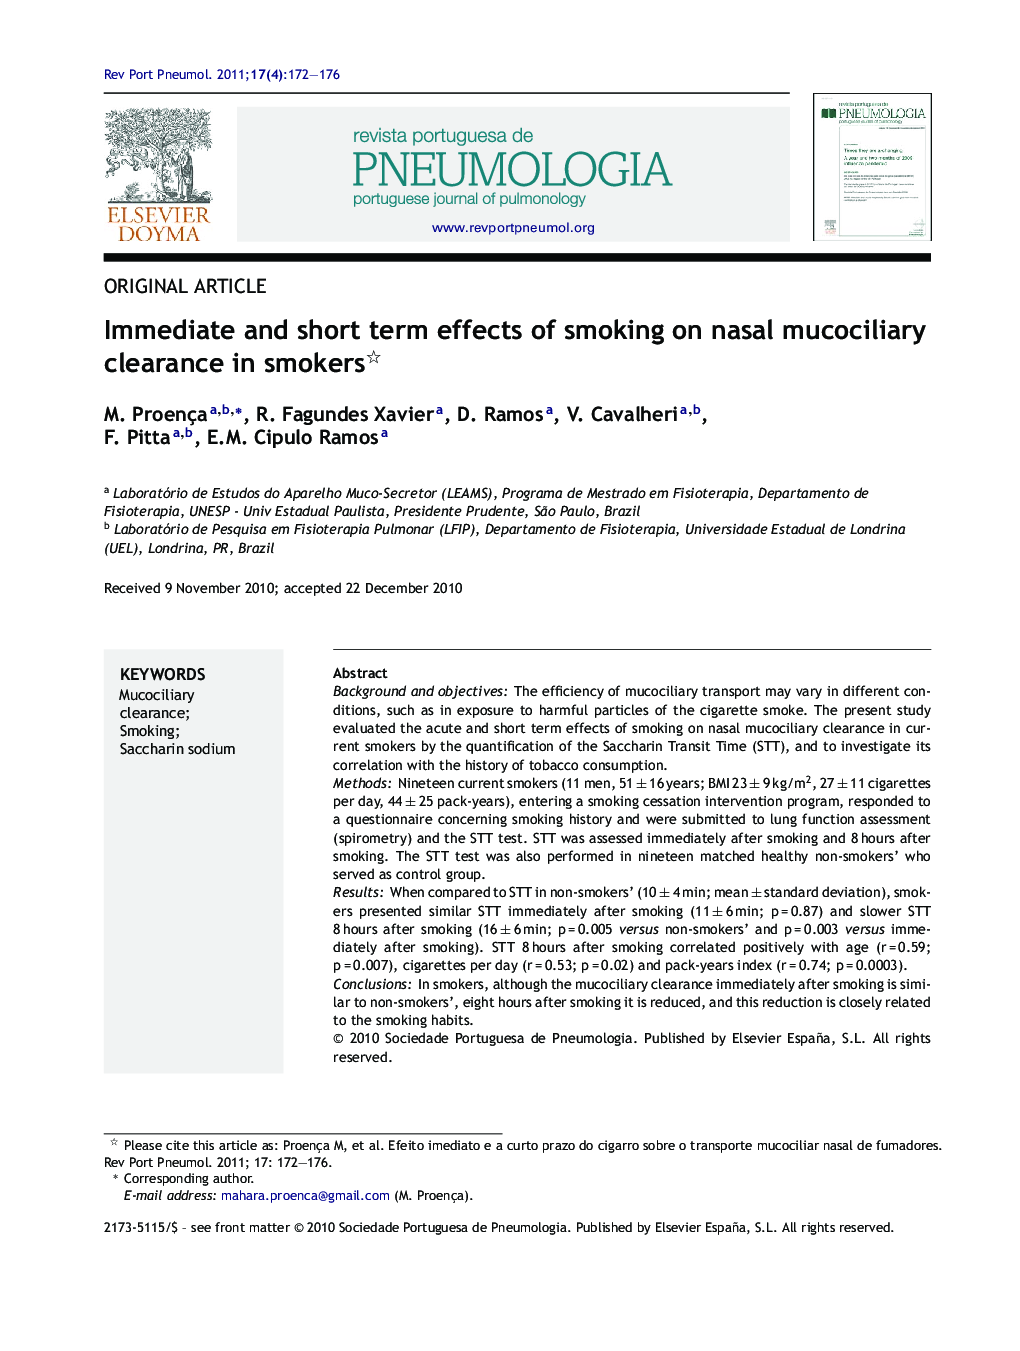 Immediate and short term effects of smoking on nasal mucociliary clearance in smokers